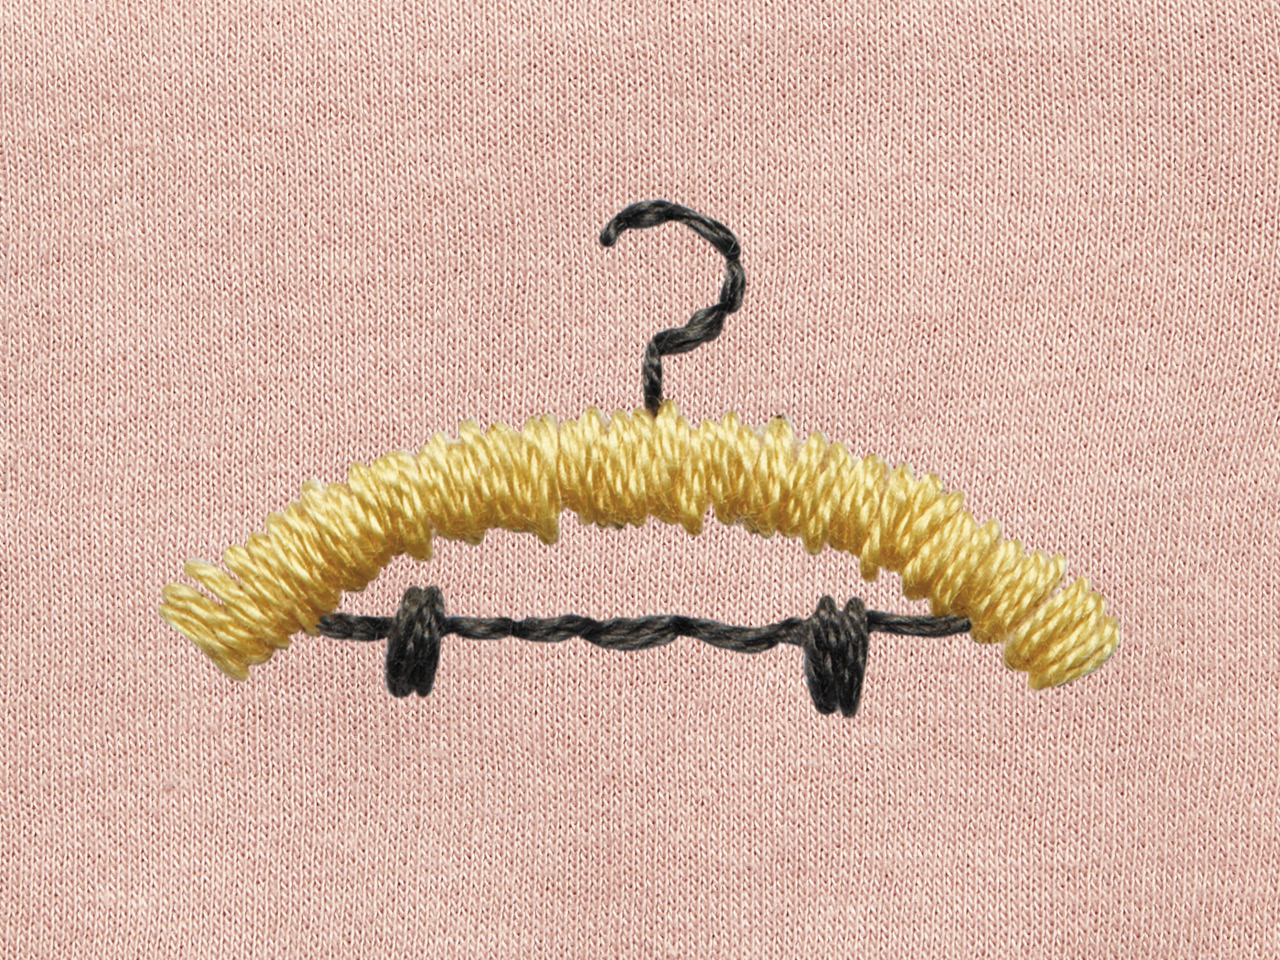 An embroidered yellow hanger on a pink cloth background